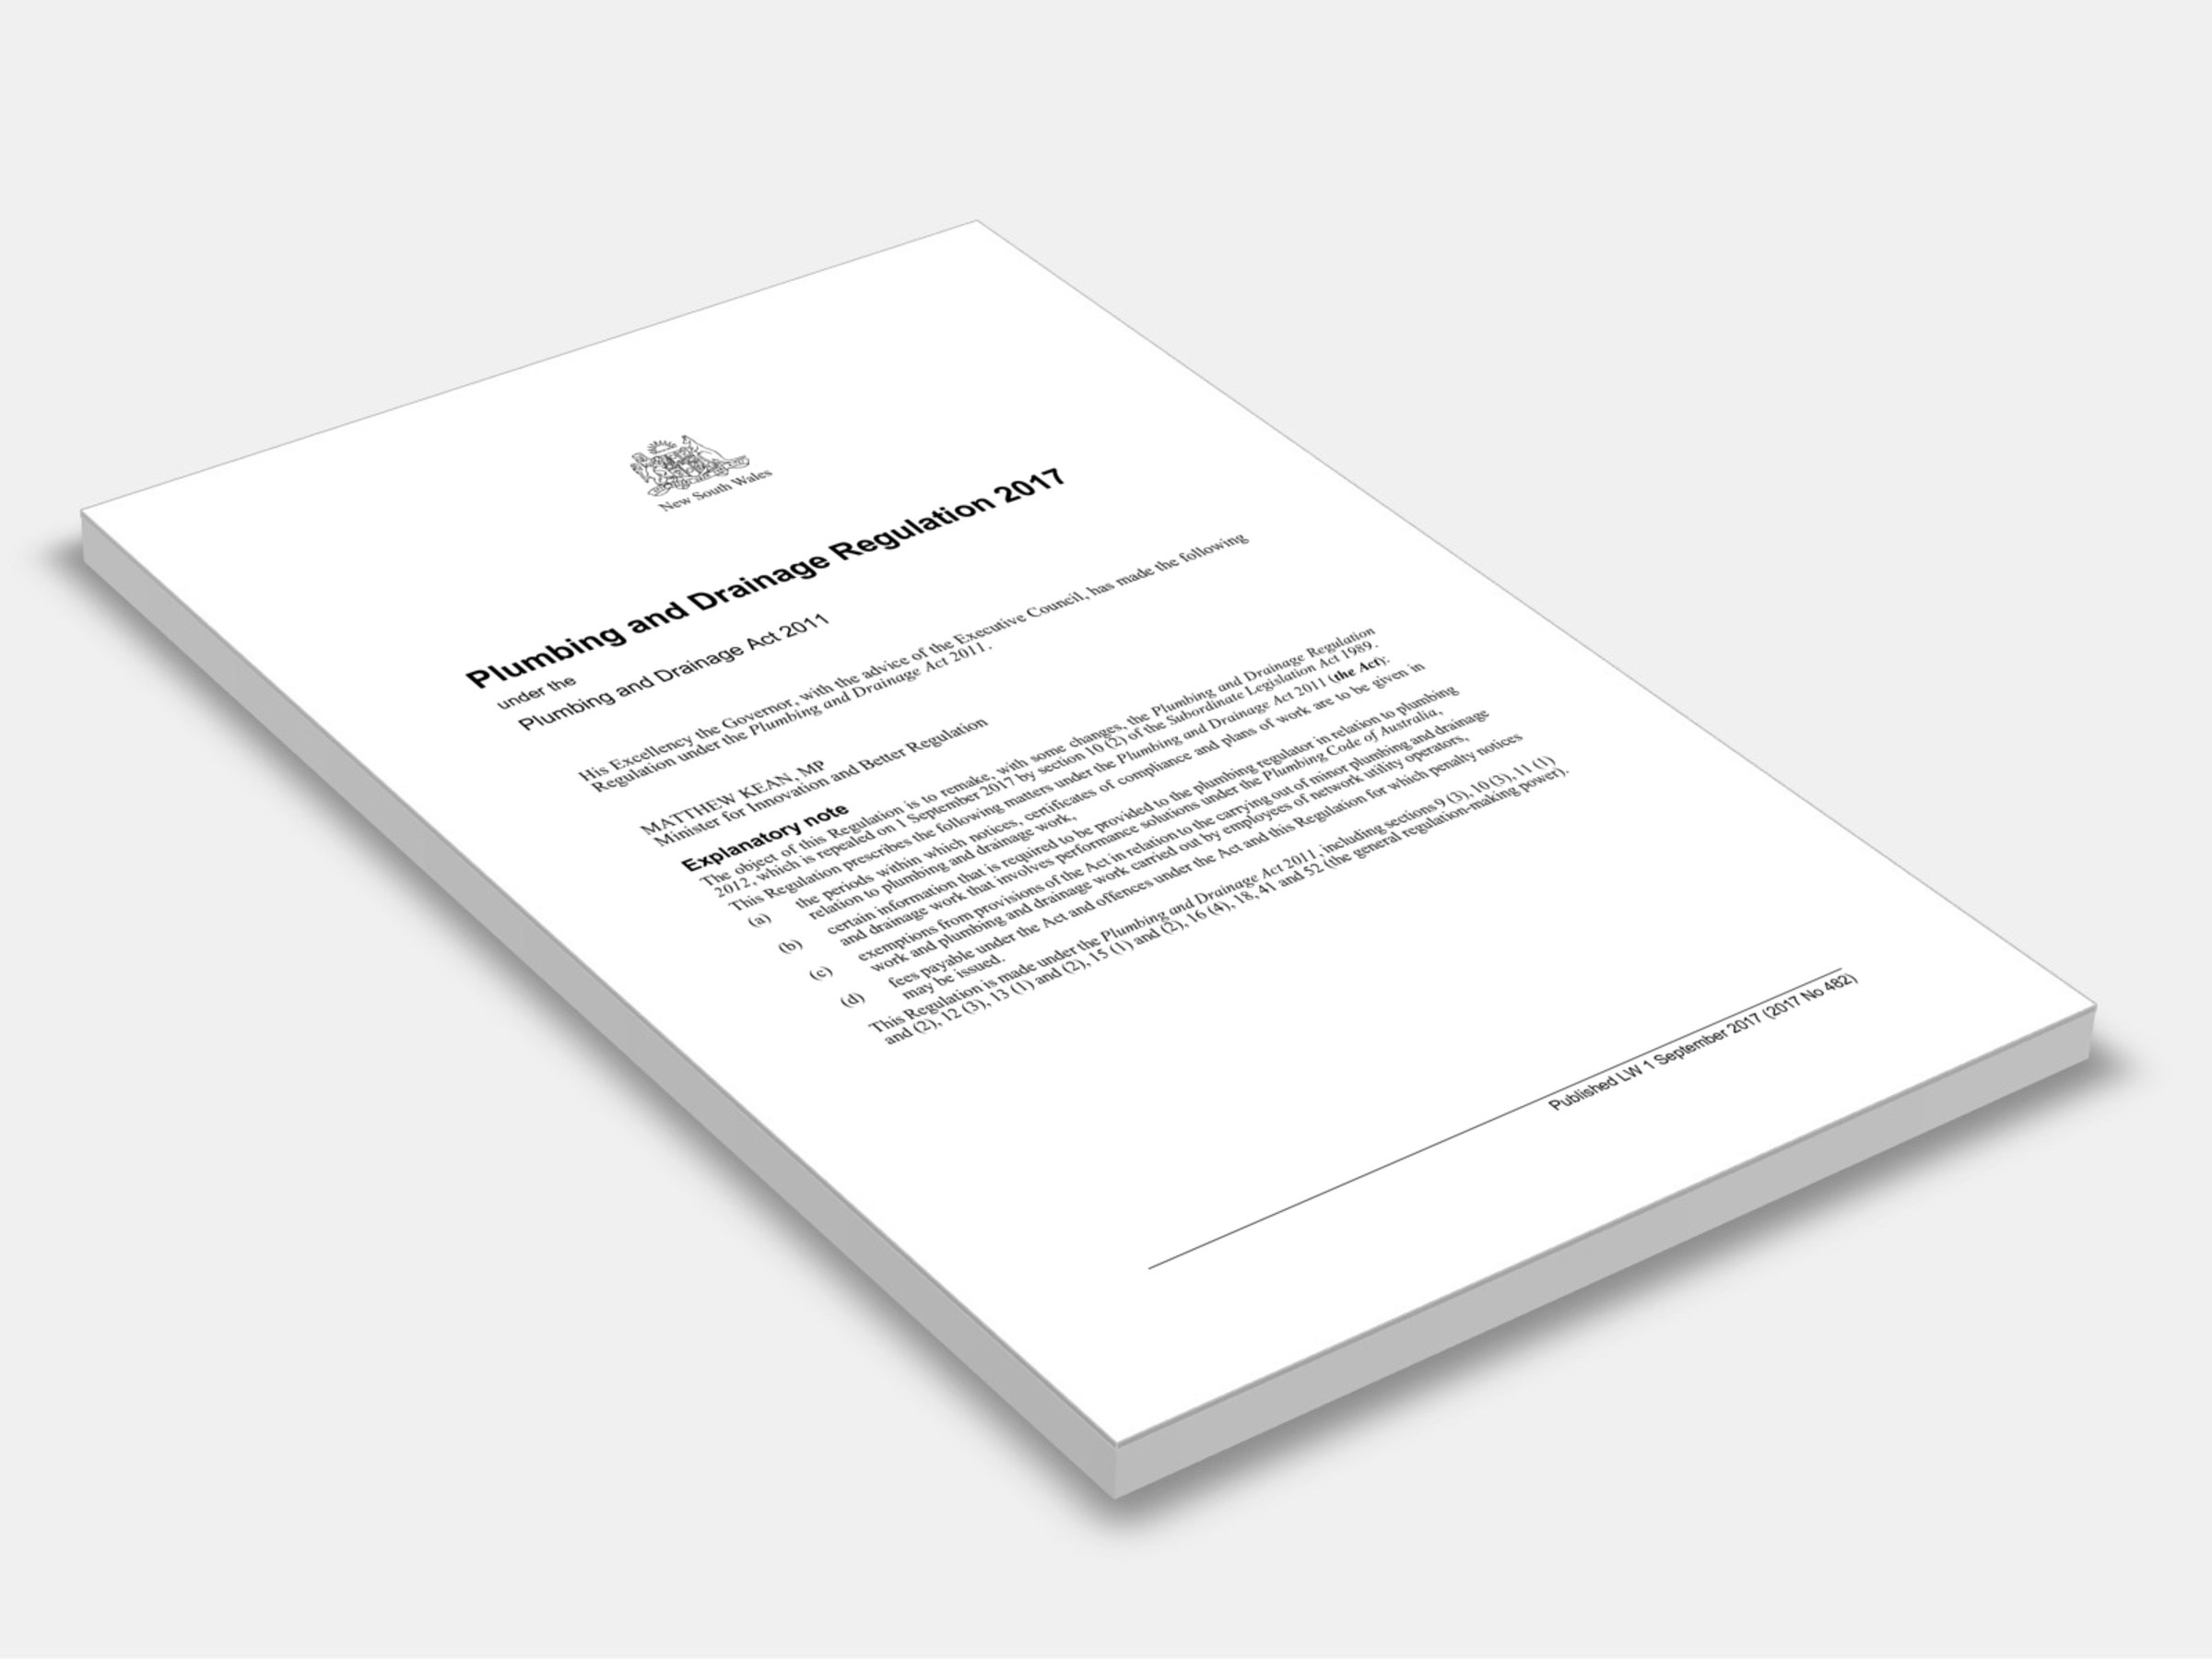 Plumbing and Drainage Regulation 2017 (NSW) 2017 cover